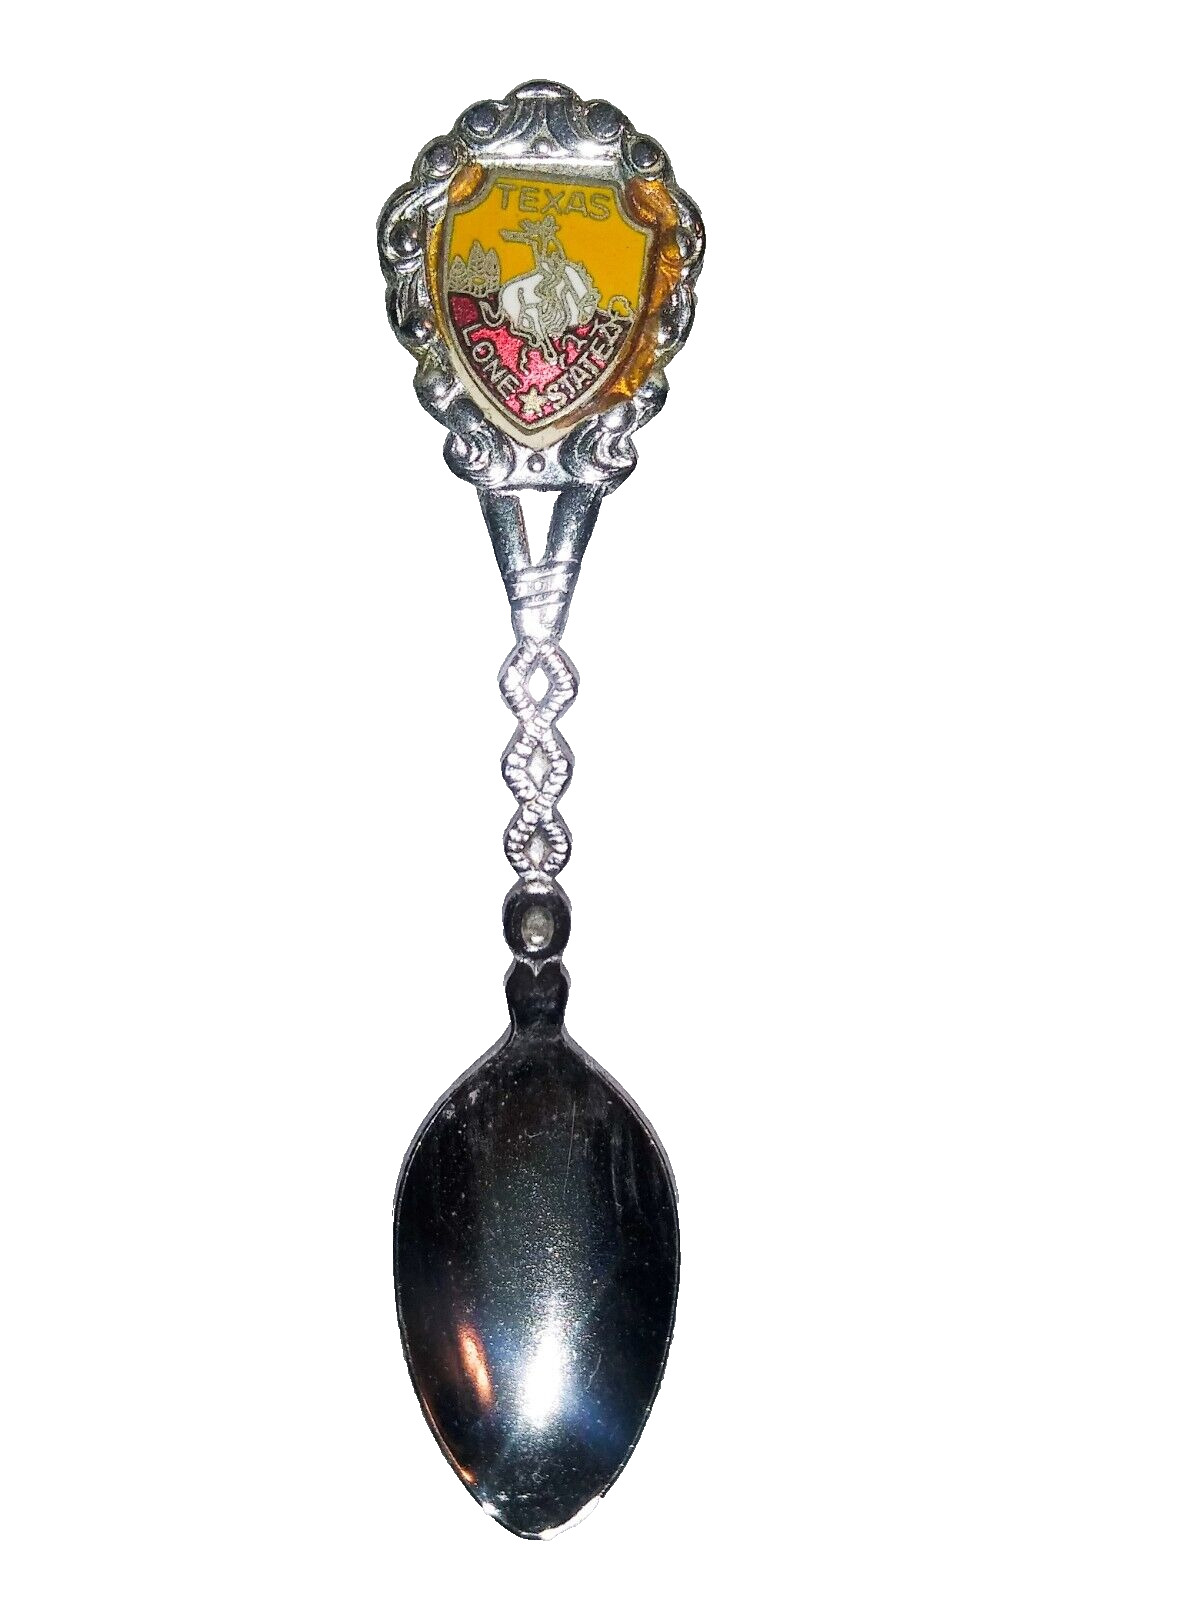 vintage Silver Plate & Enamel Collector Spoon Texas Lone * State western rodeo